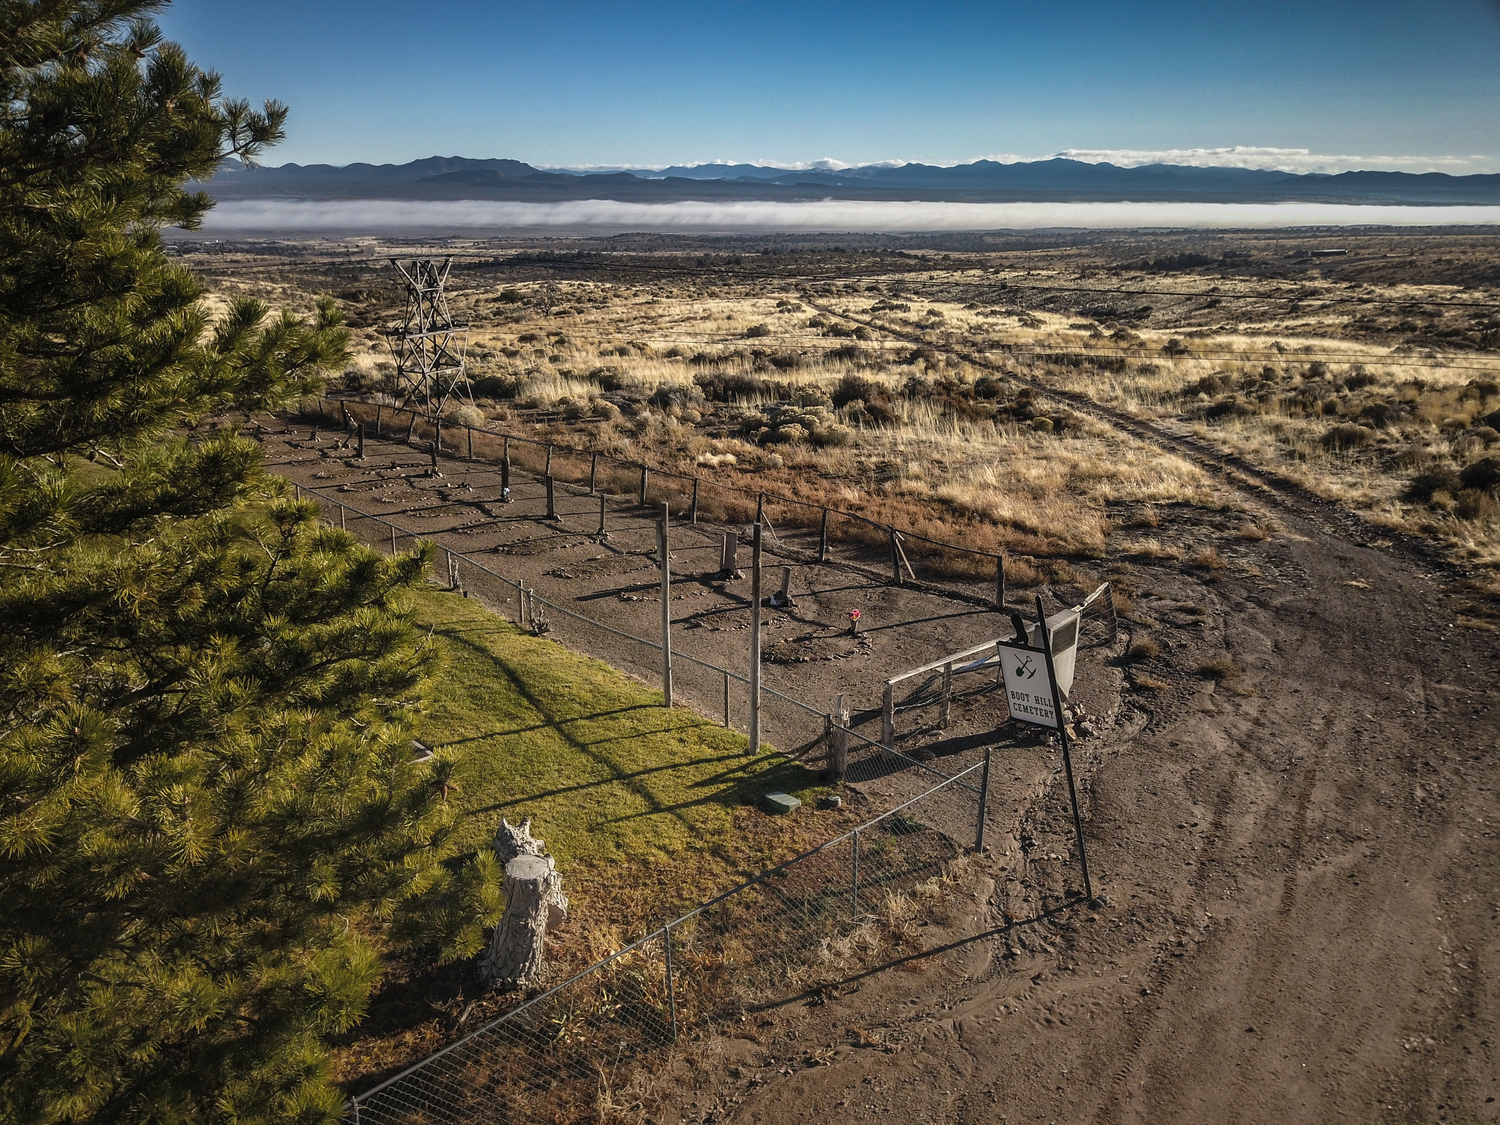 "Aerial view over Boot Hill Cemetery in Pioche, NV."